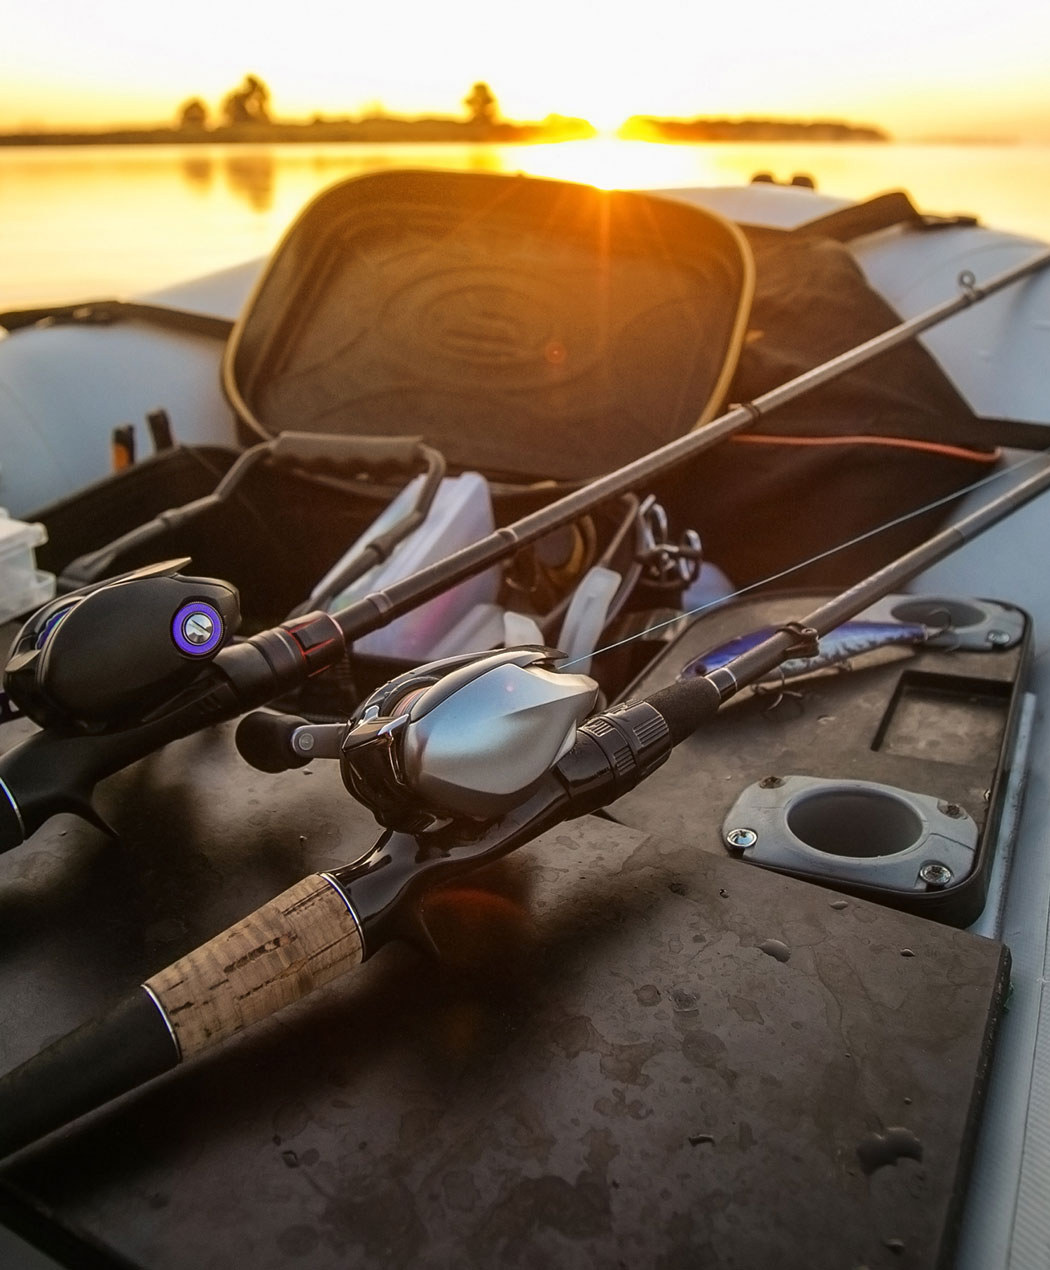 fishing equipment on a boat deck at sunset